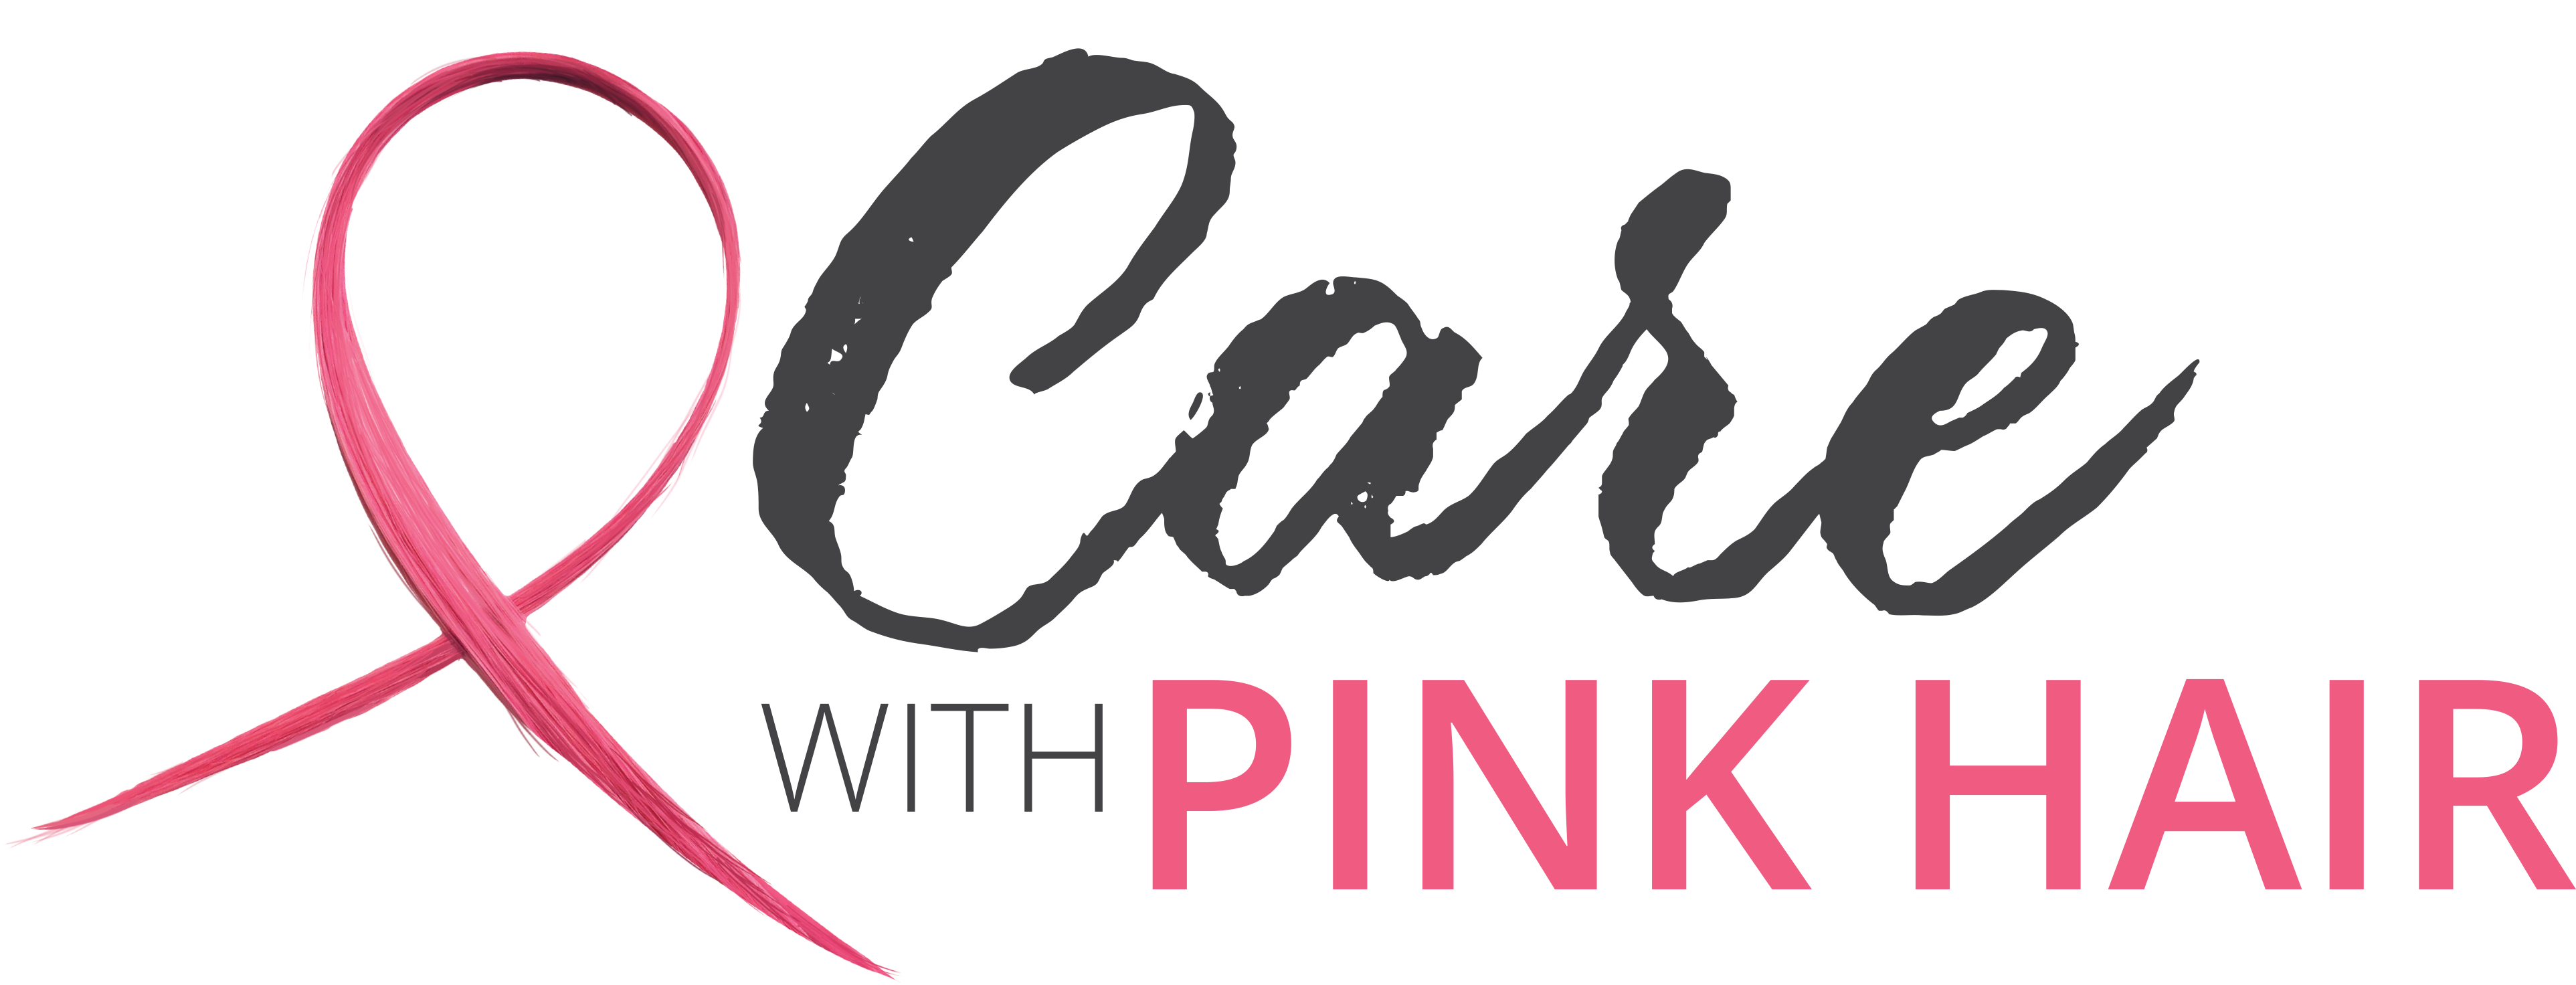 Care with Pink Hair logo